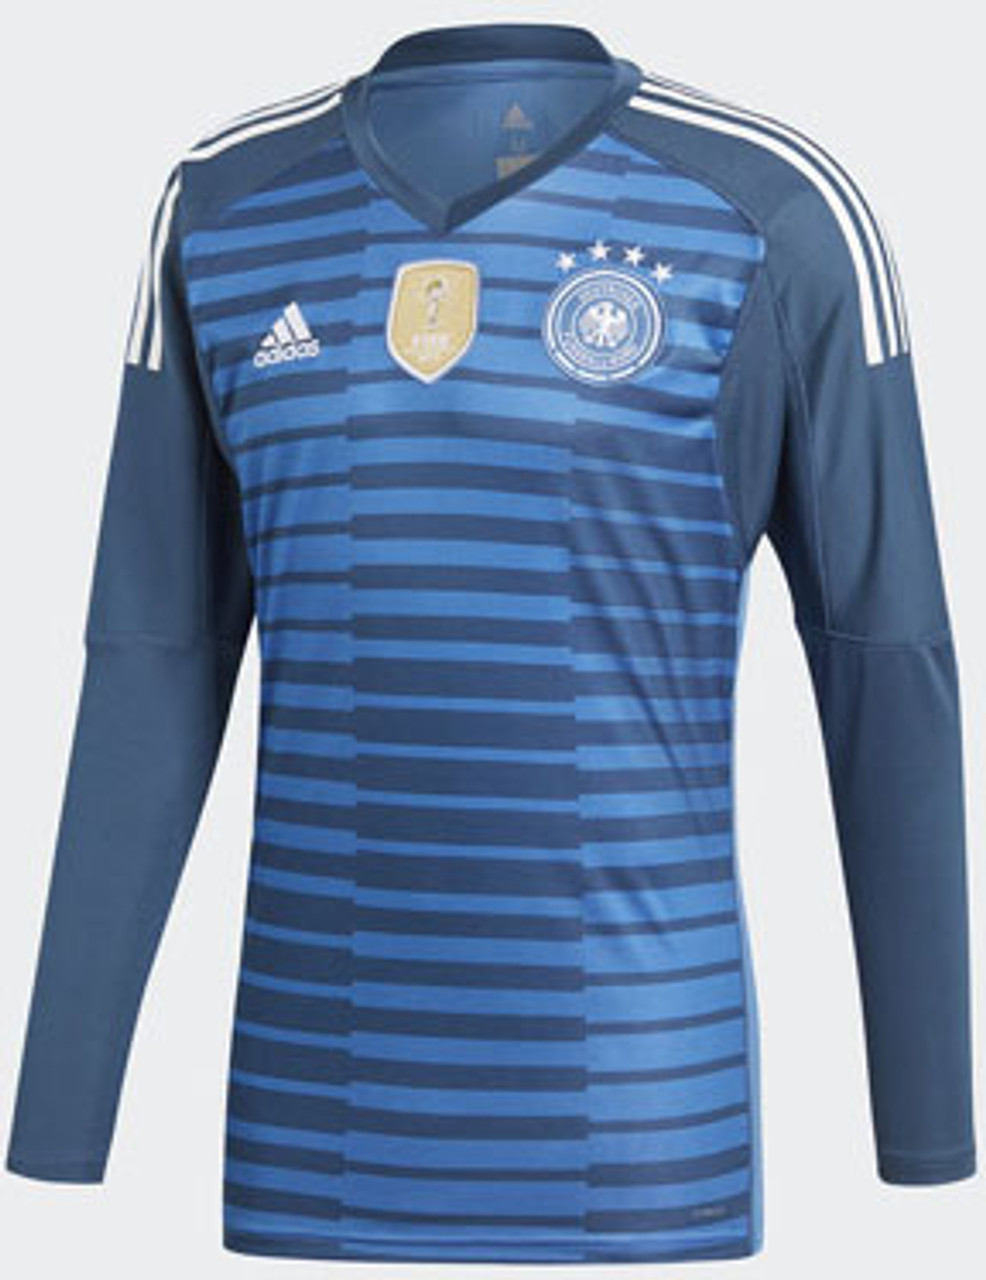 adidas world cup germany jersey